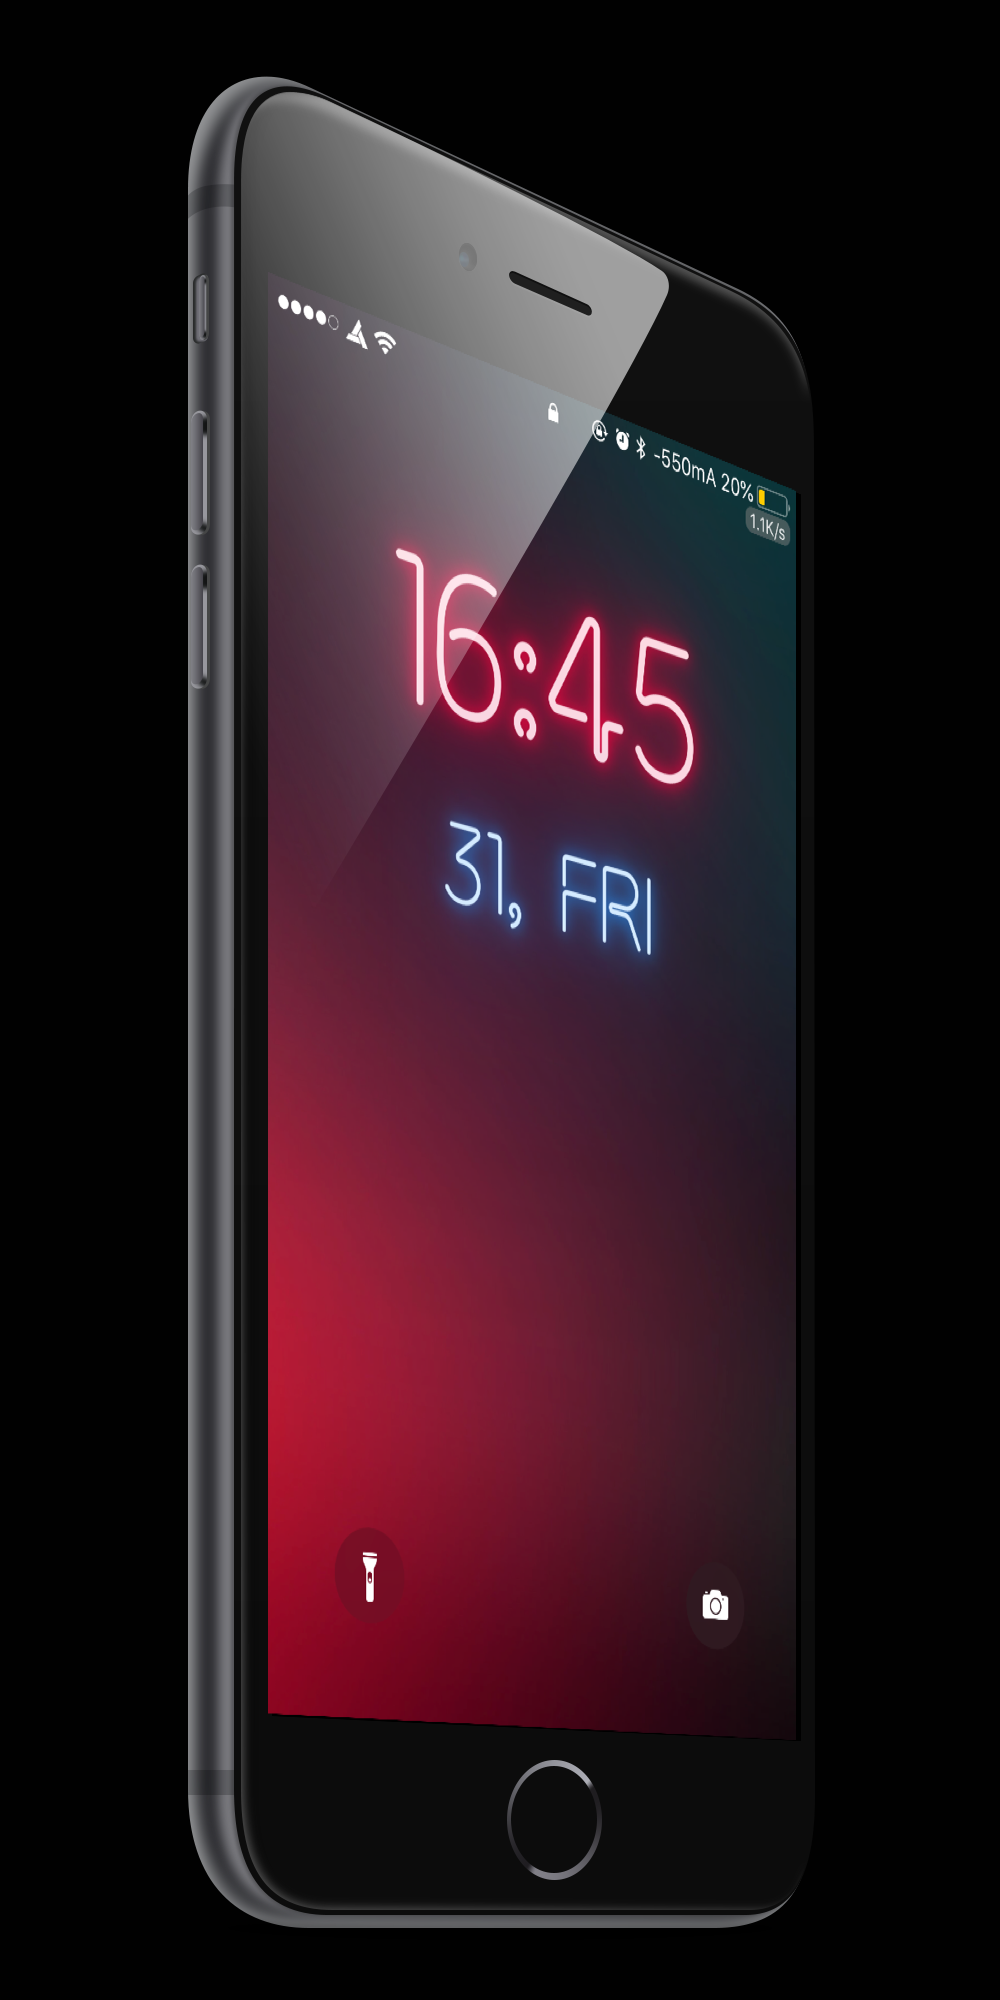 Setup] Just found this wallpaper looks dope with Neon widget 1000x2000